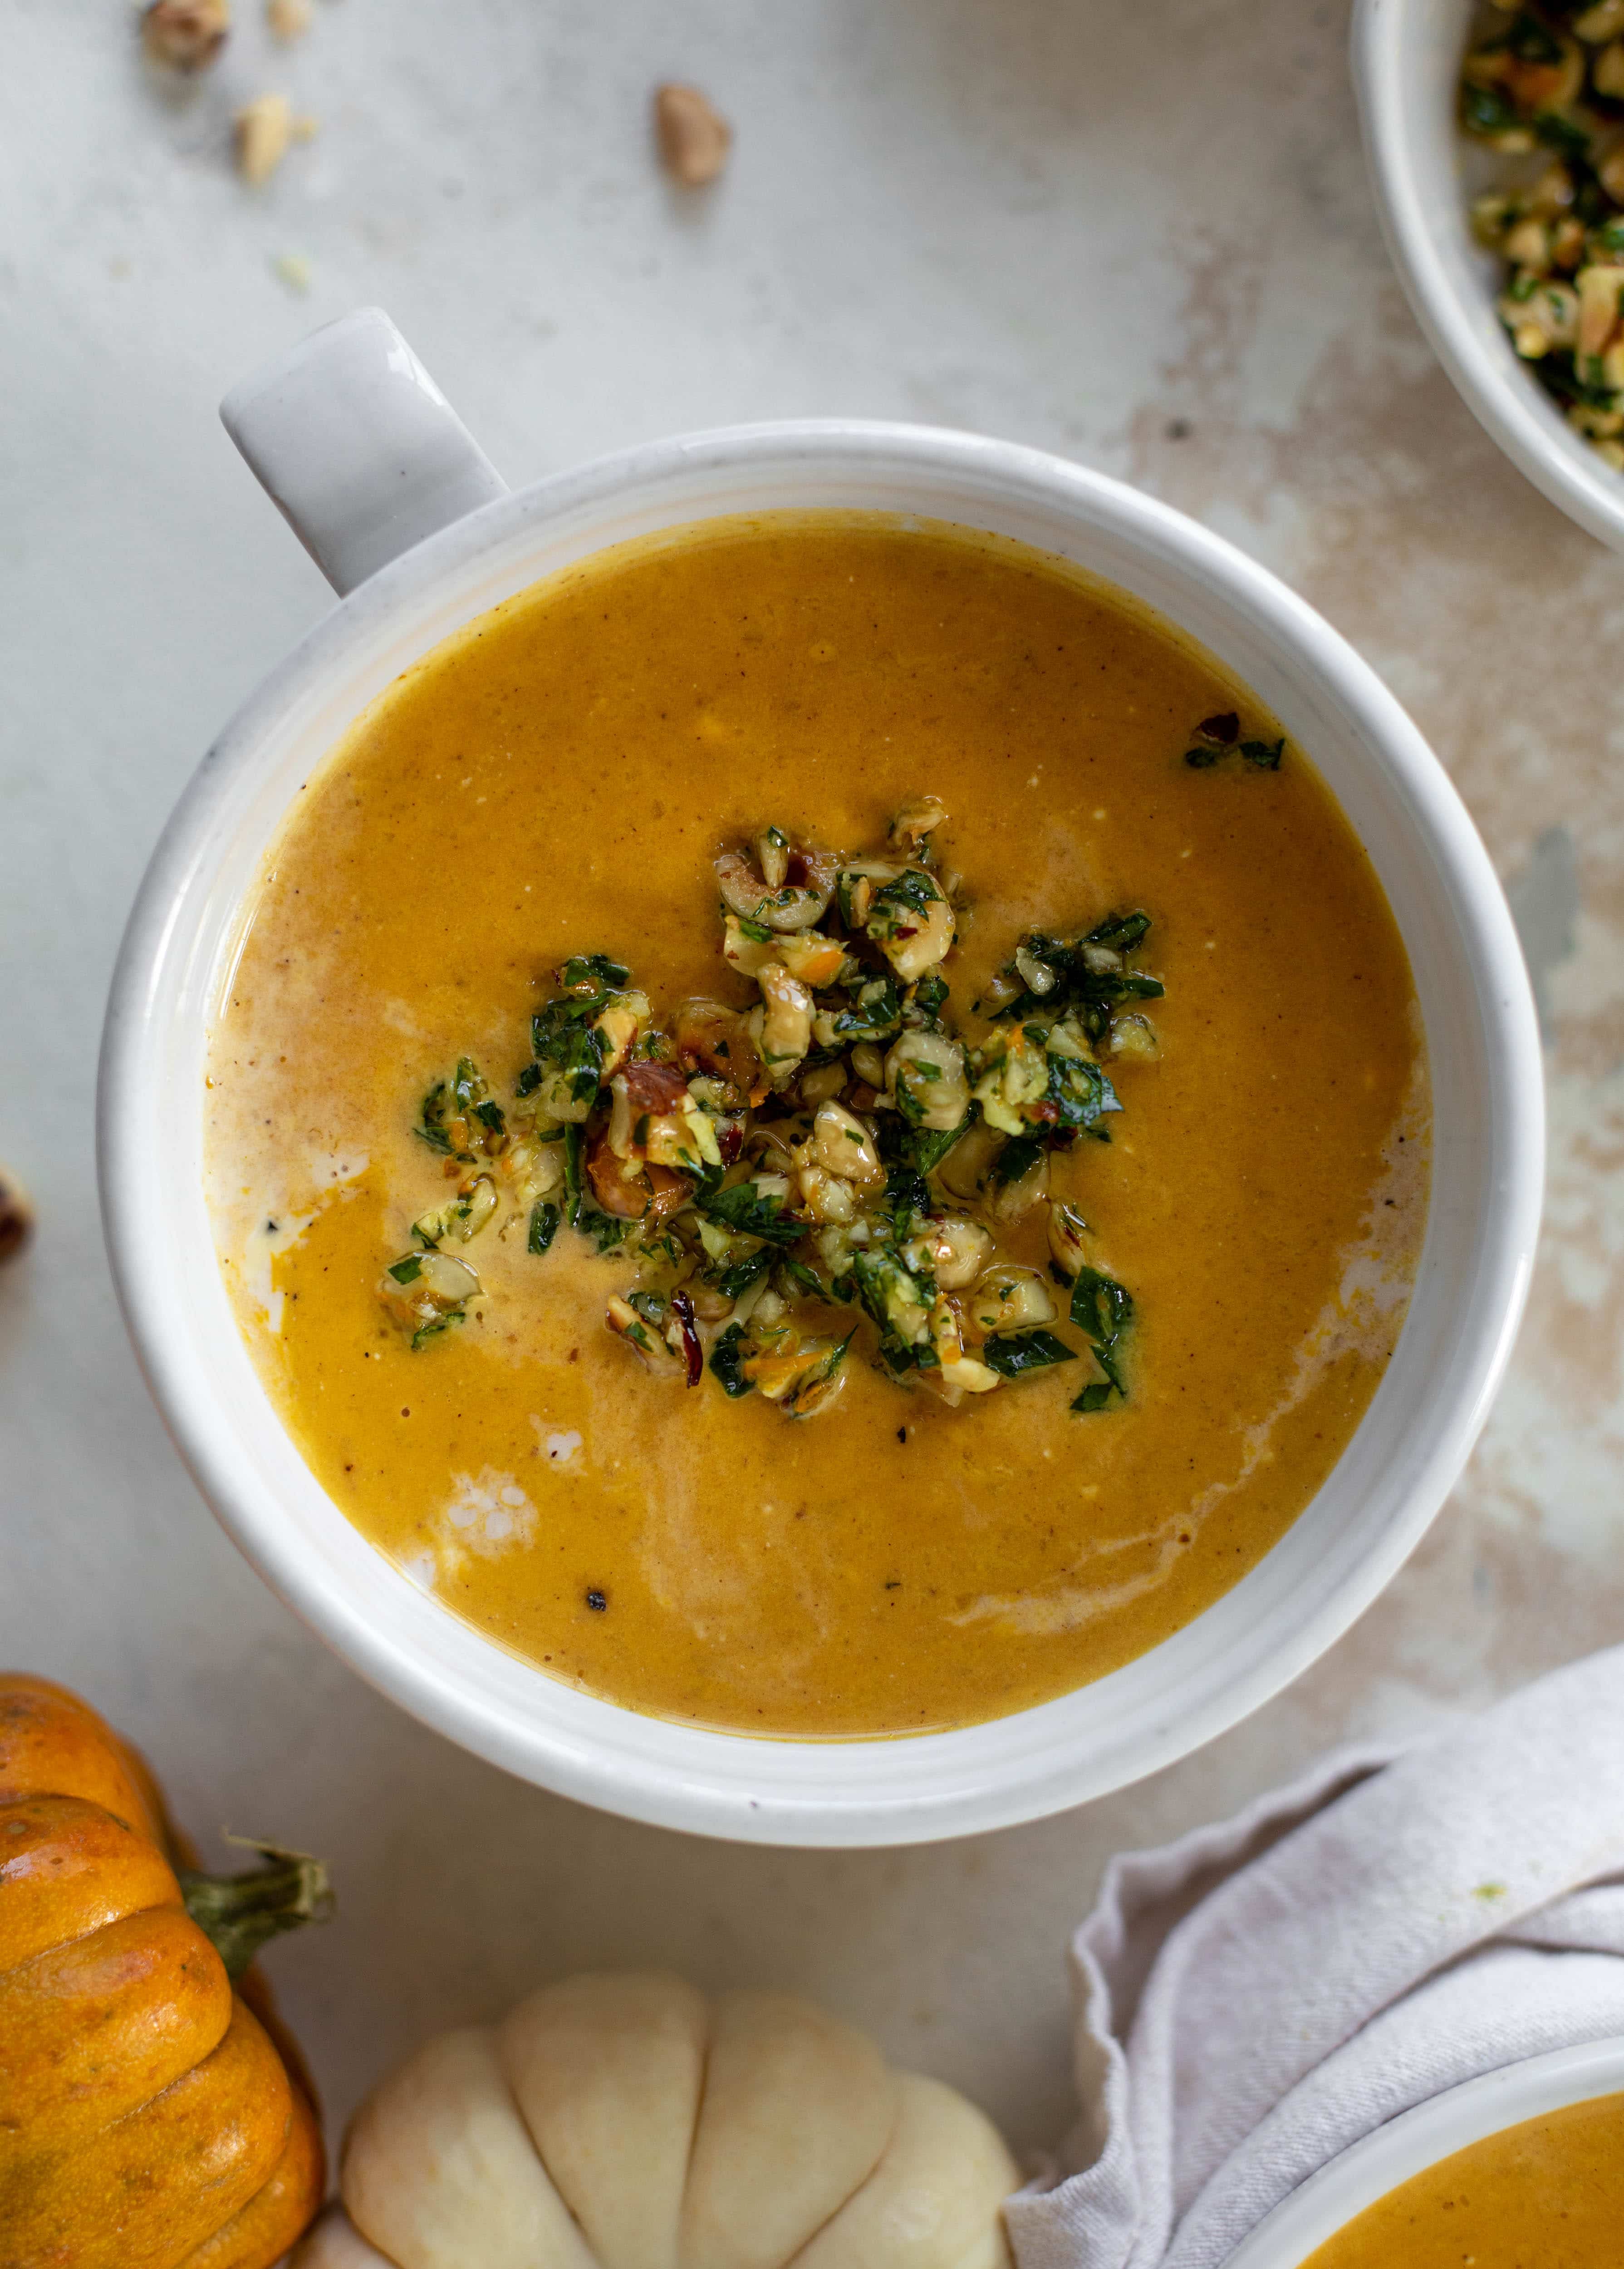 This pumpkin cream soup is silky smooth and delicious, then topped with a roasted hazelnut gremolata for extra flavor and crunch!